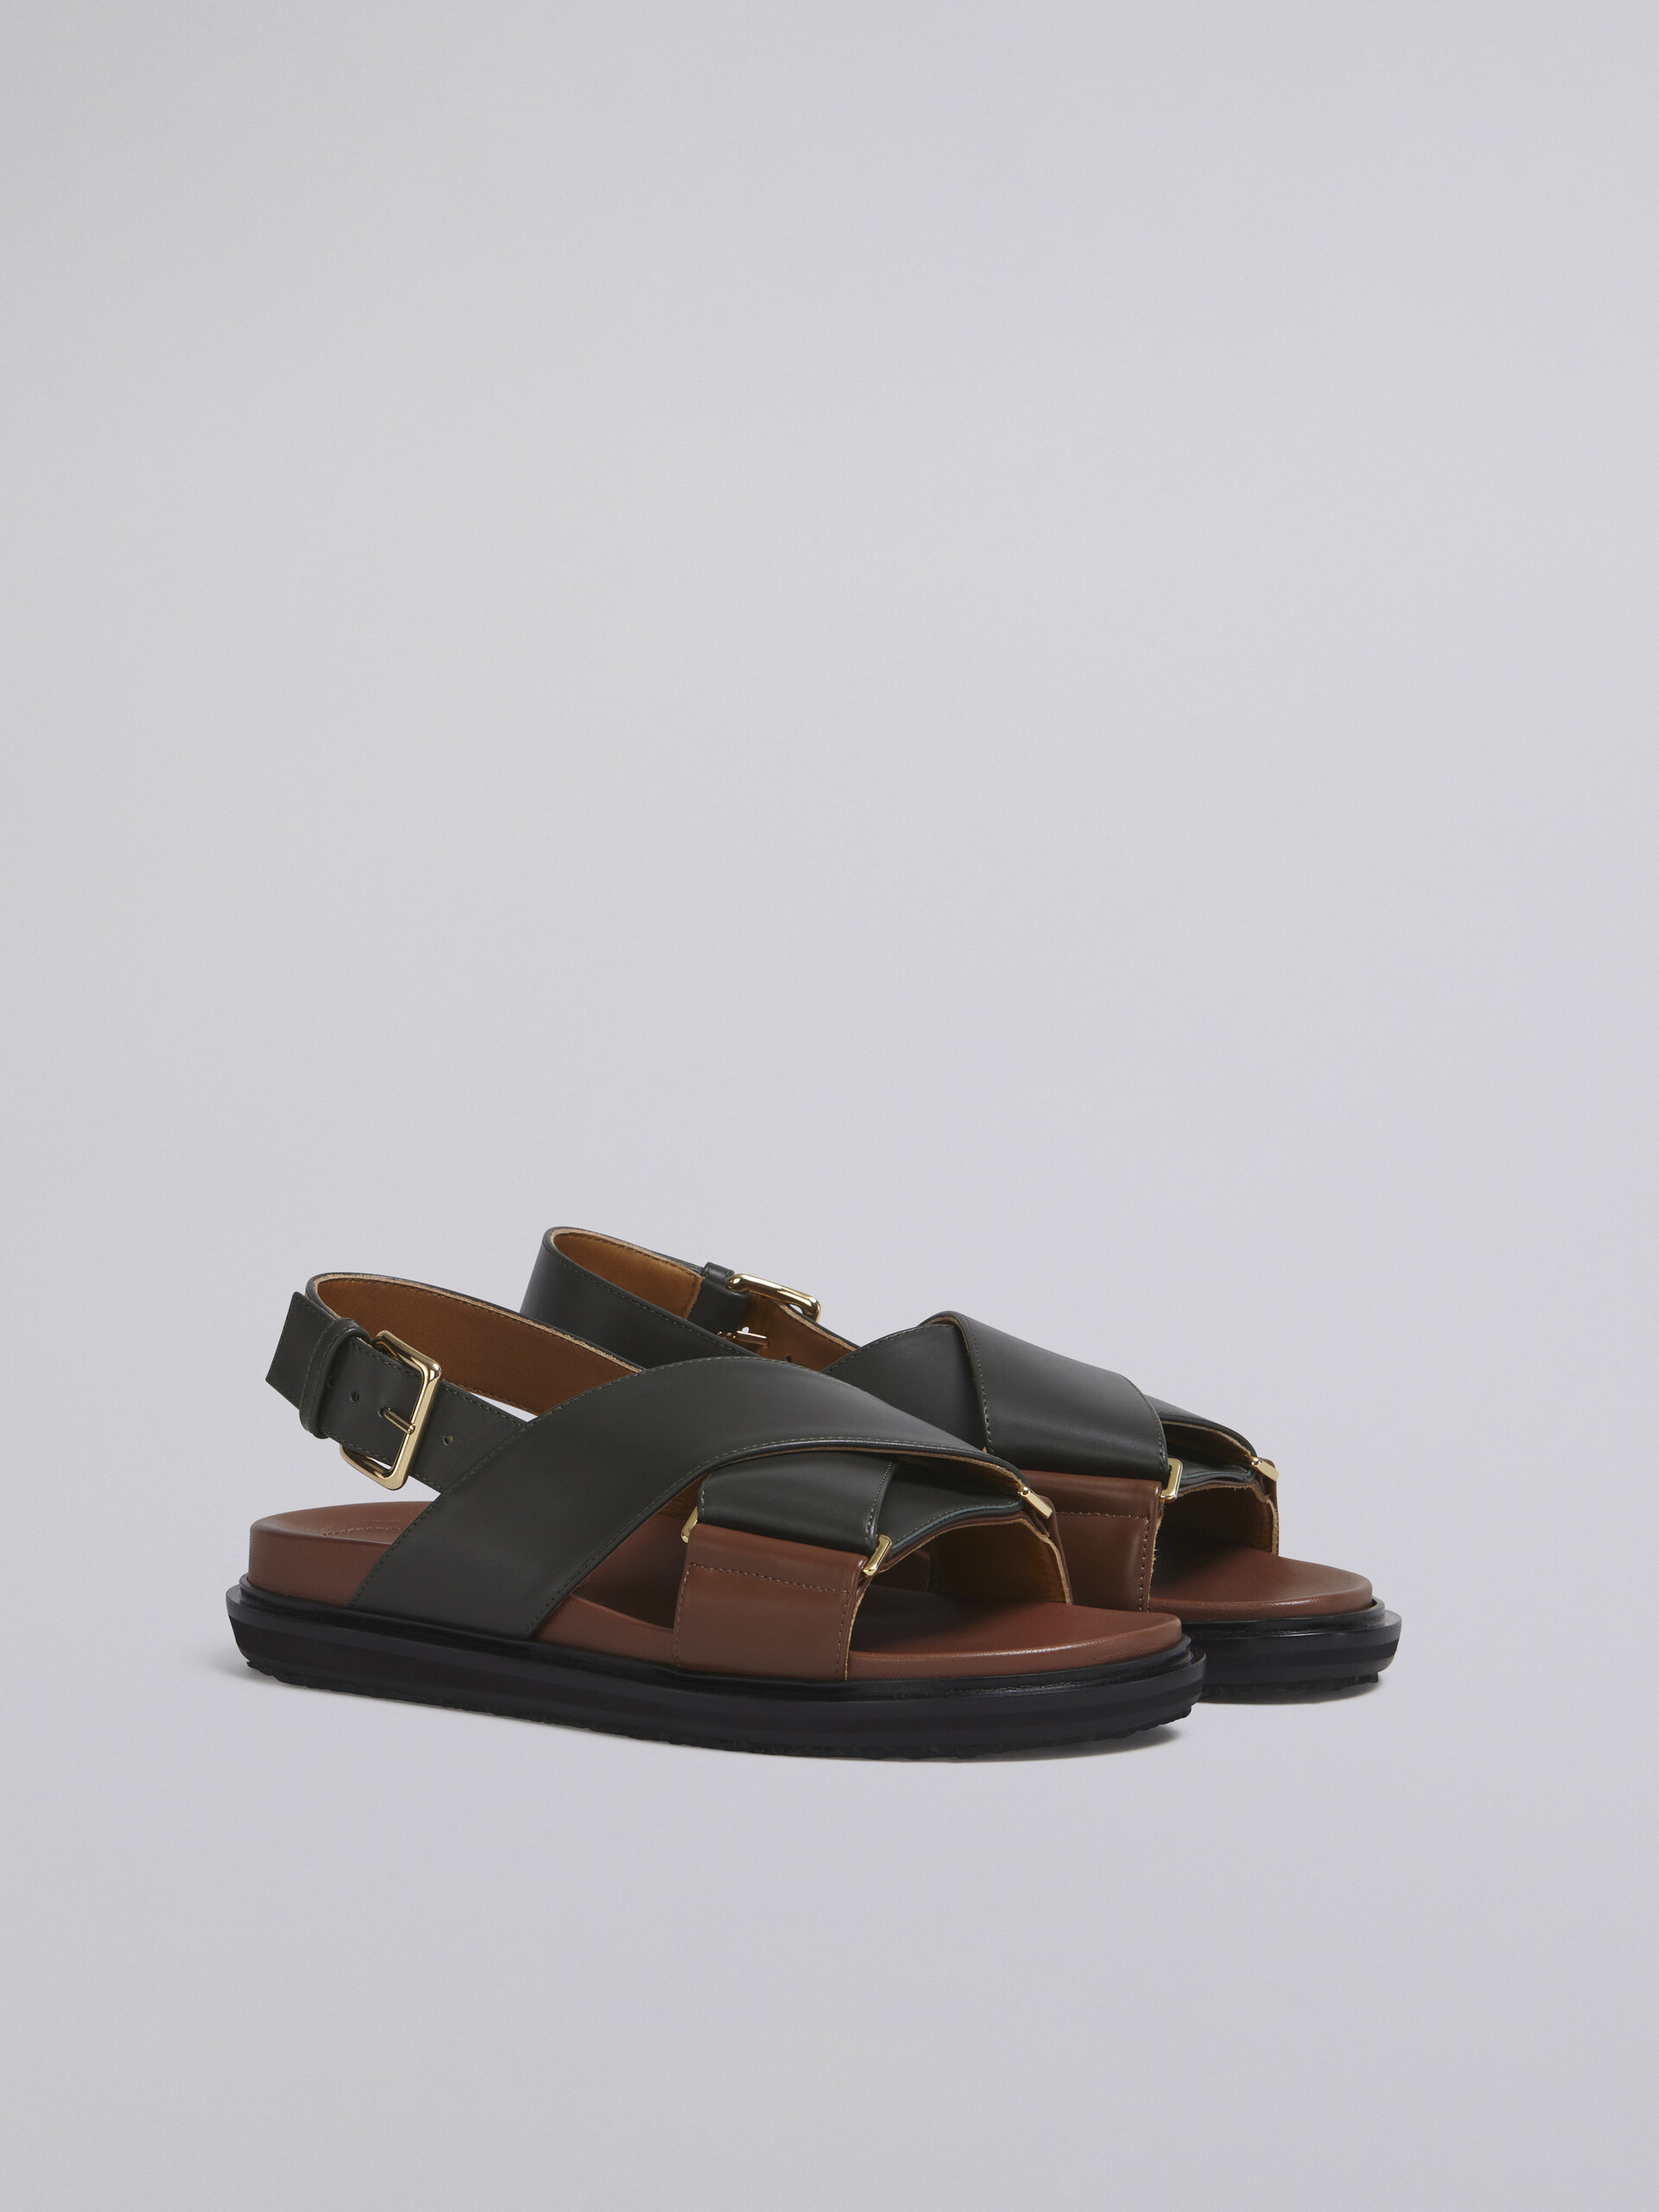 Black and brown leather Fussbett - Sandals - Image 2